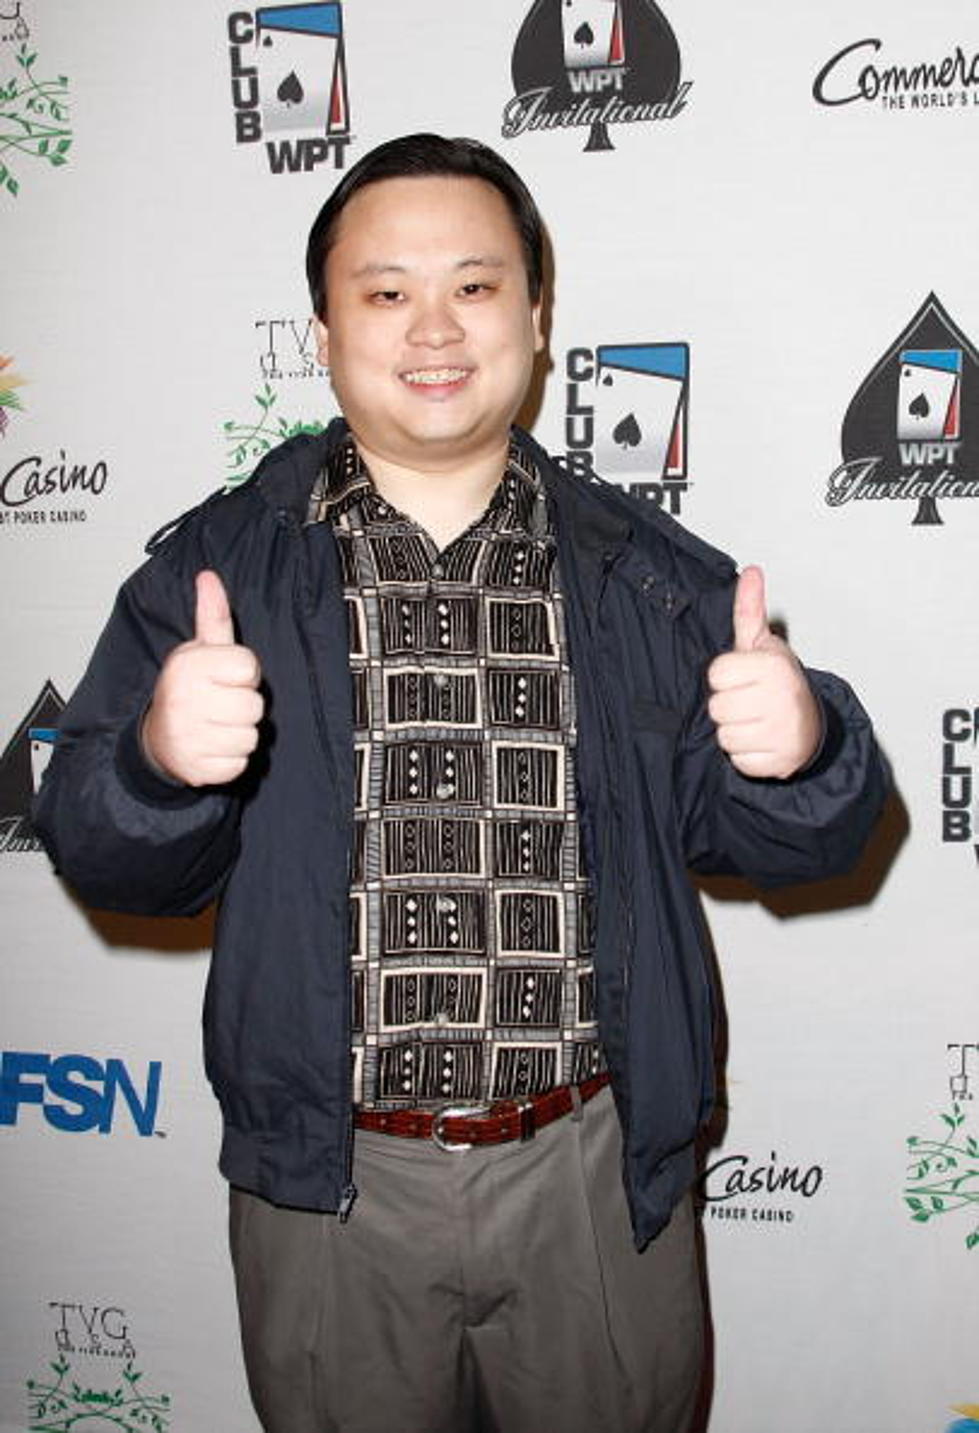 Former <i>American Idol</i> Contestant William Hung Now Works For Sheriff’s Department